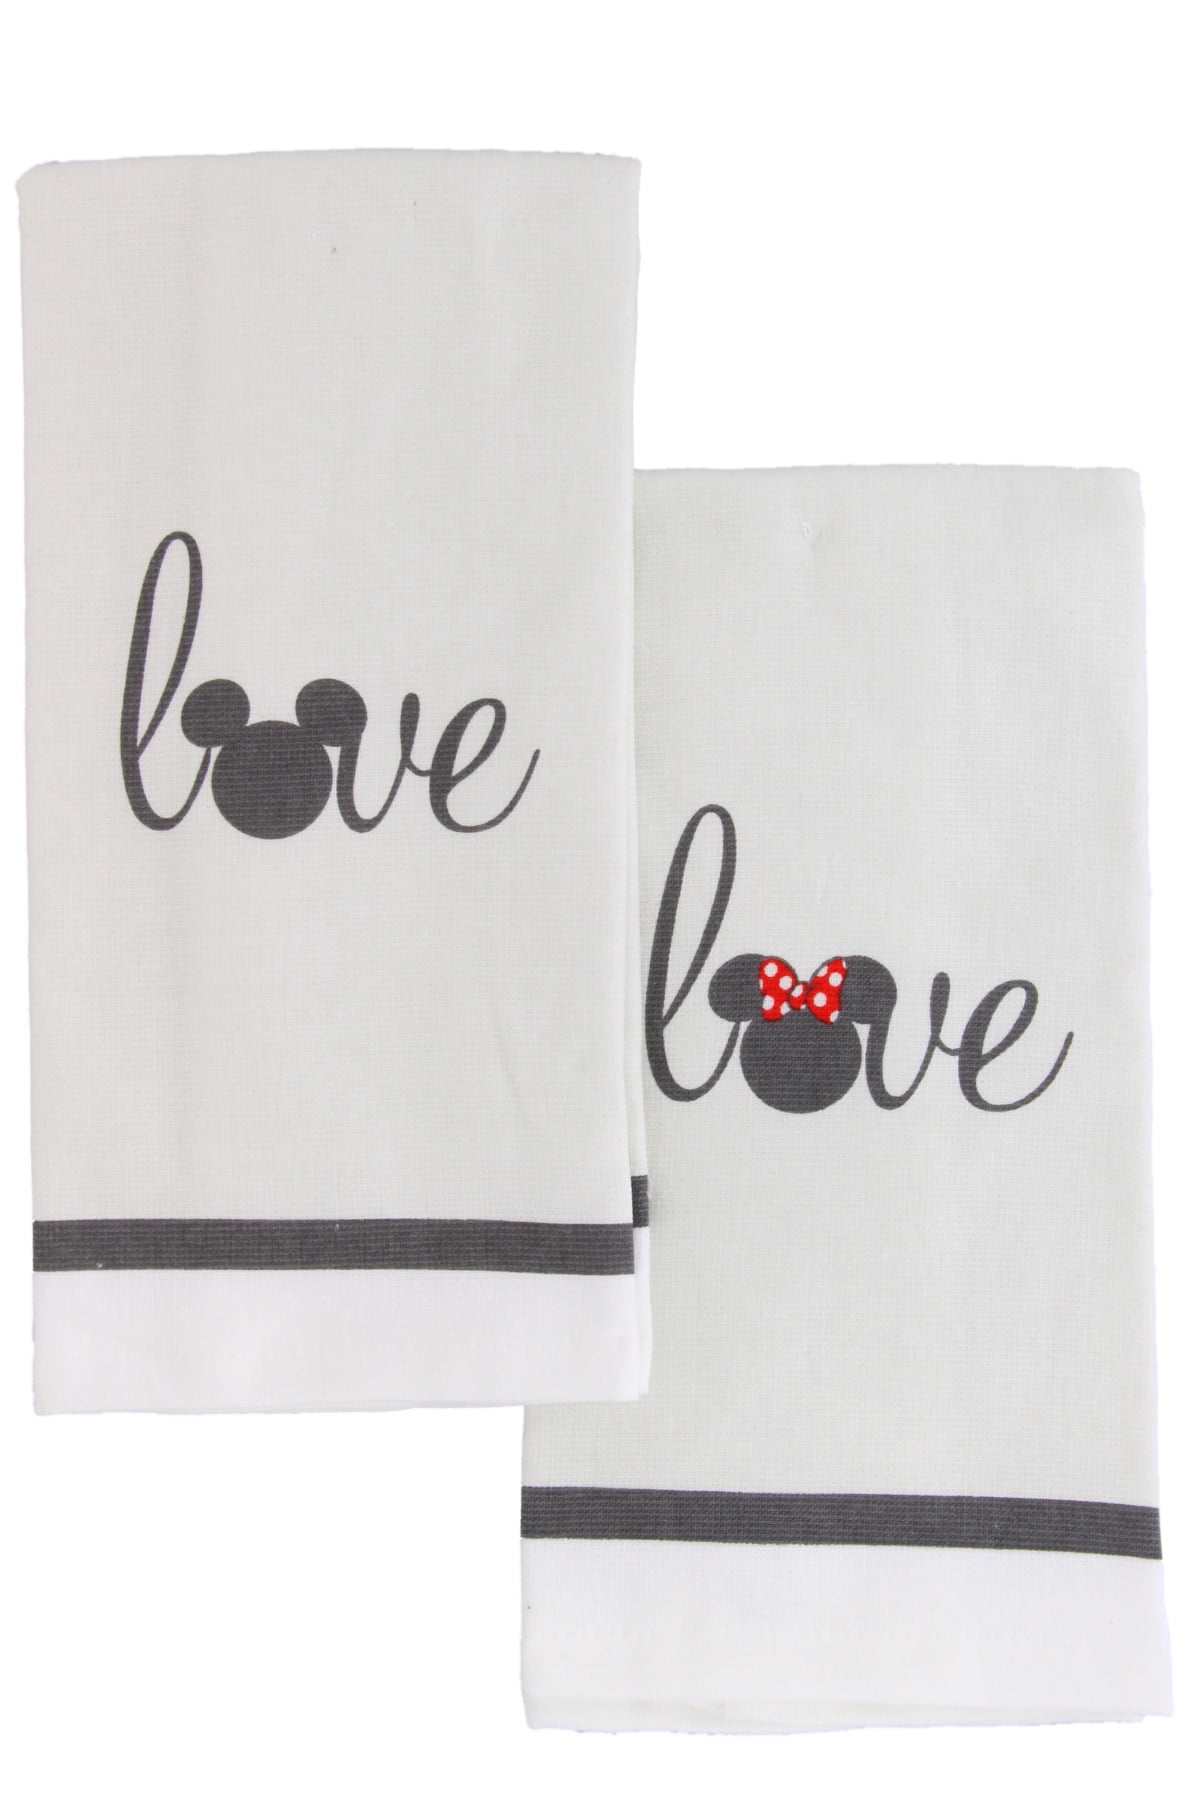 Disney 100% Cotton Kitchen Towels, 2pk-Soft and Absorbent Decorative Kitchen  Towels Perfect for Drying Dishes and Hands, 16 x 28- Mr. and Mrs. 